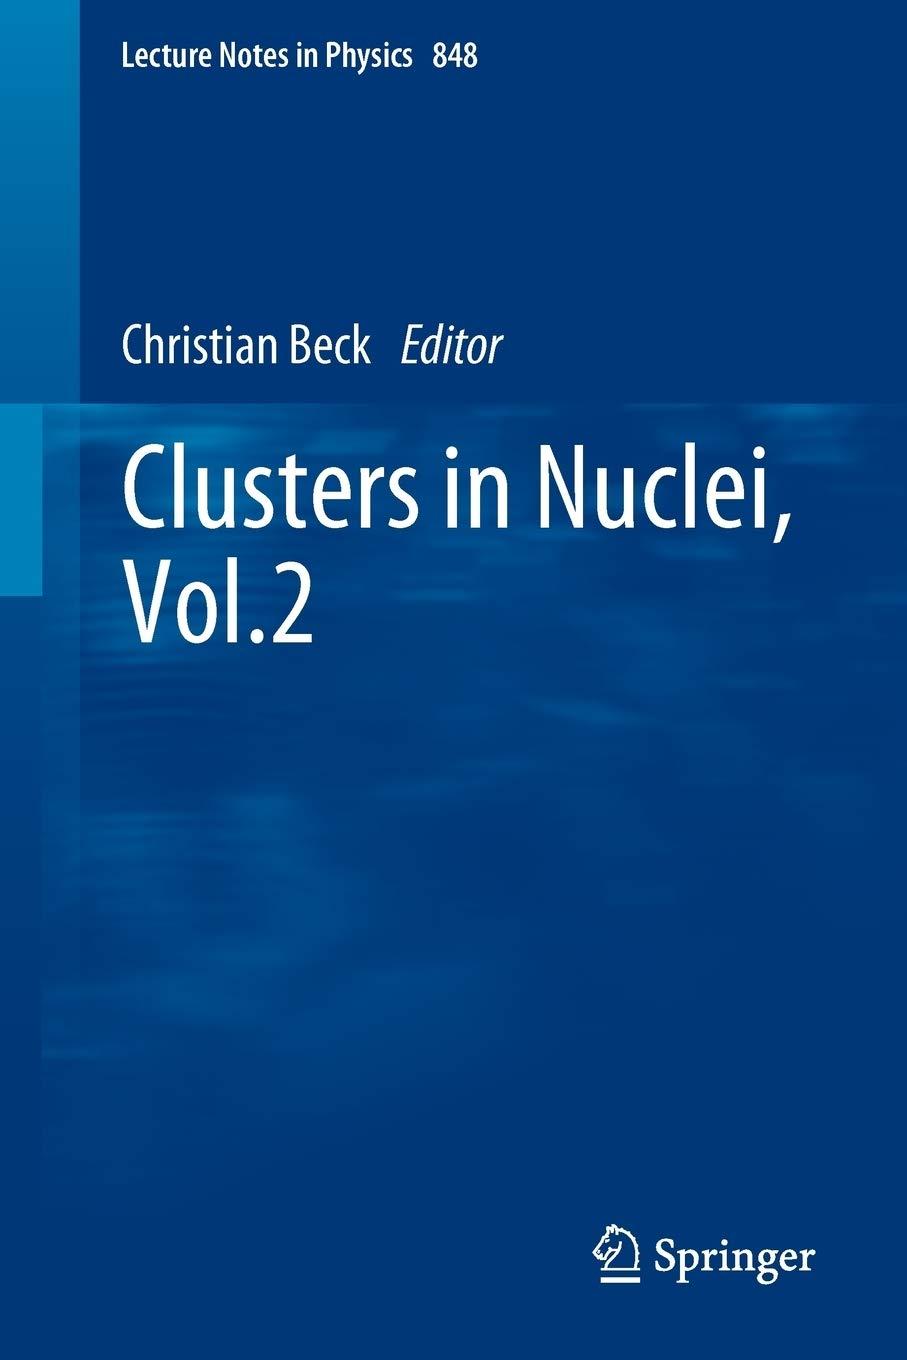 clusters in nuclei vol.2 1st edition christian beck 978-3642247064